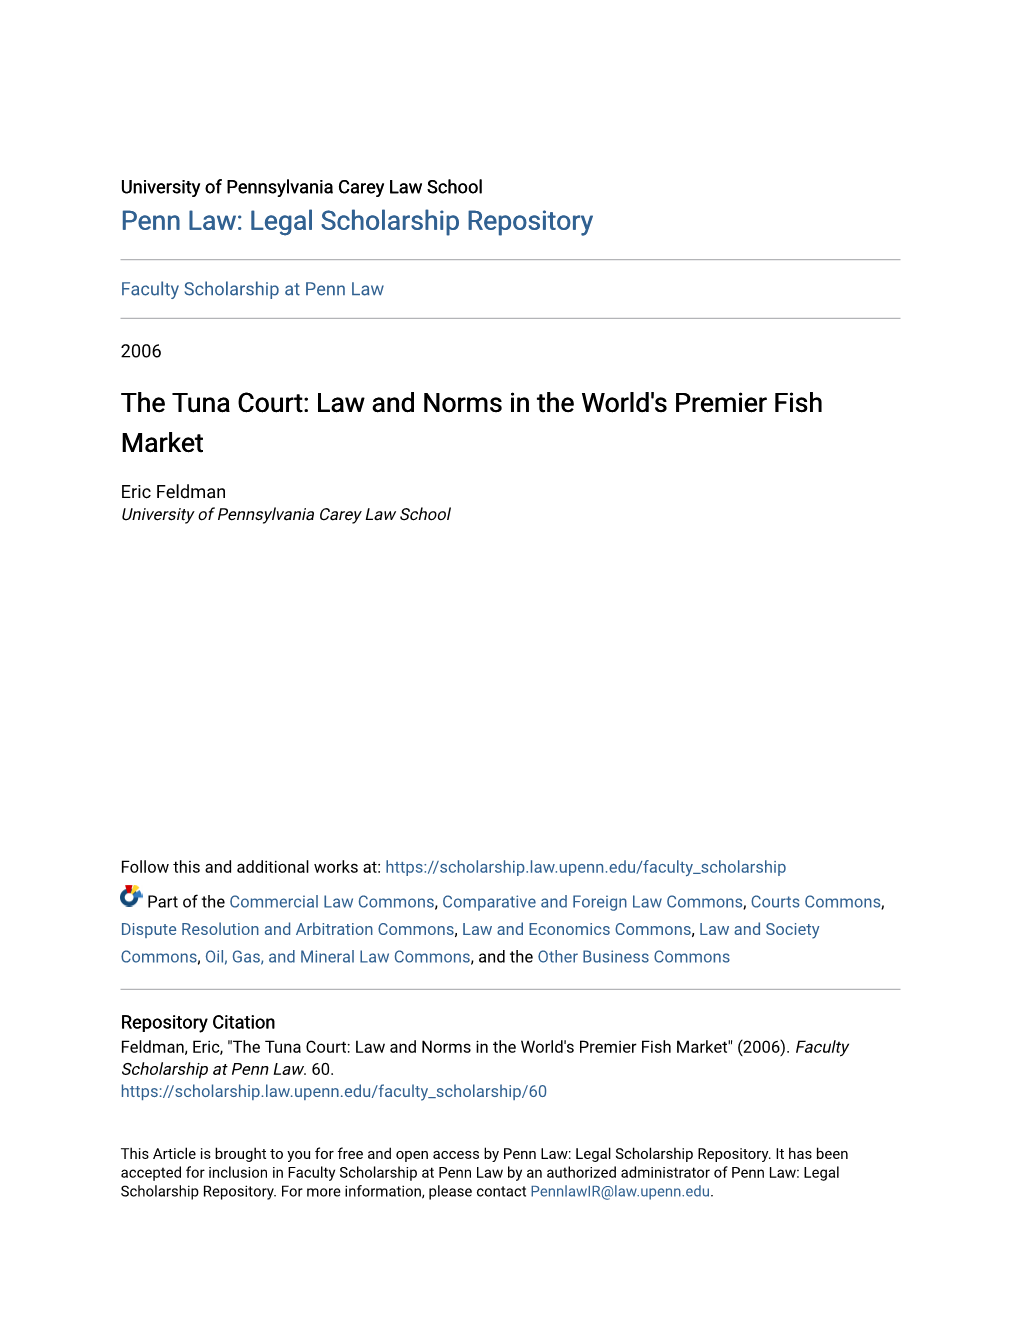 The Tuna Court: Law and Norms in the World's Premier Fish Market